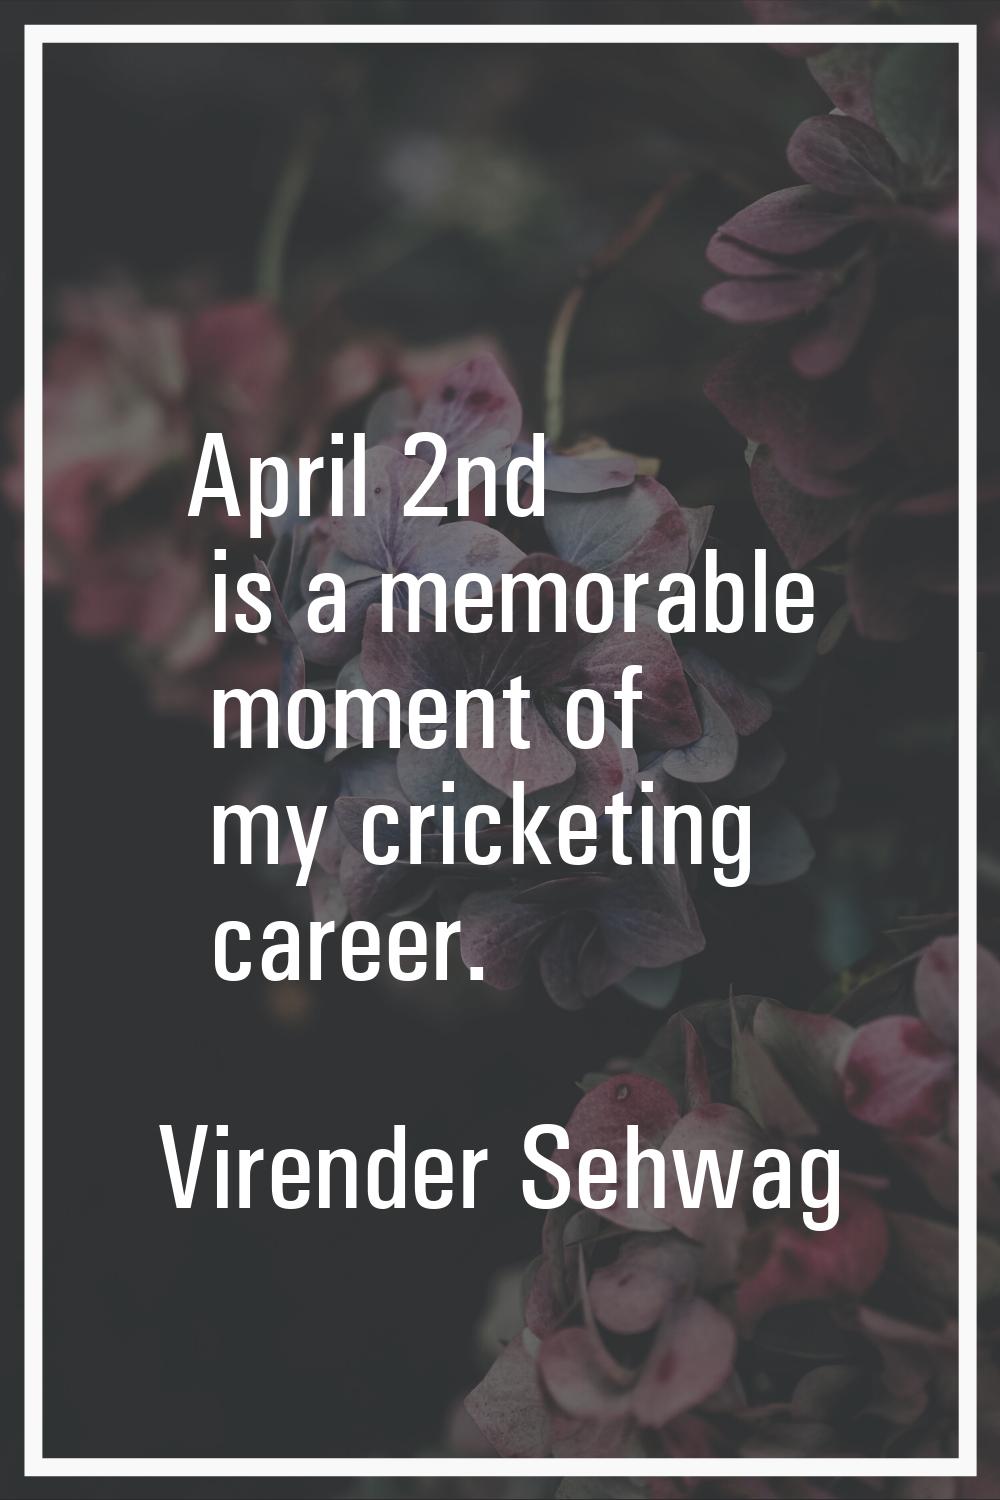 April 2nd is a memorable moment of my cricketing career.